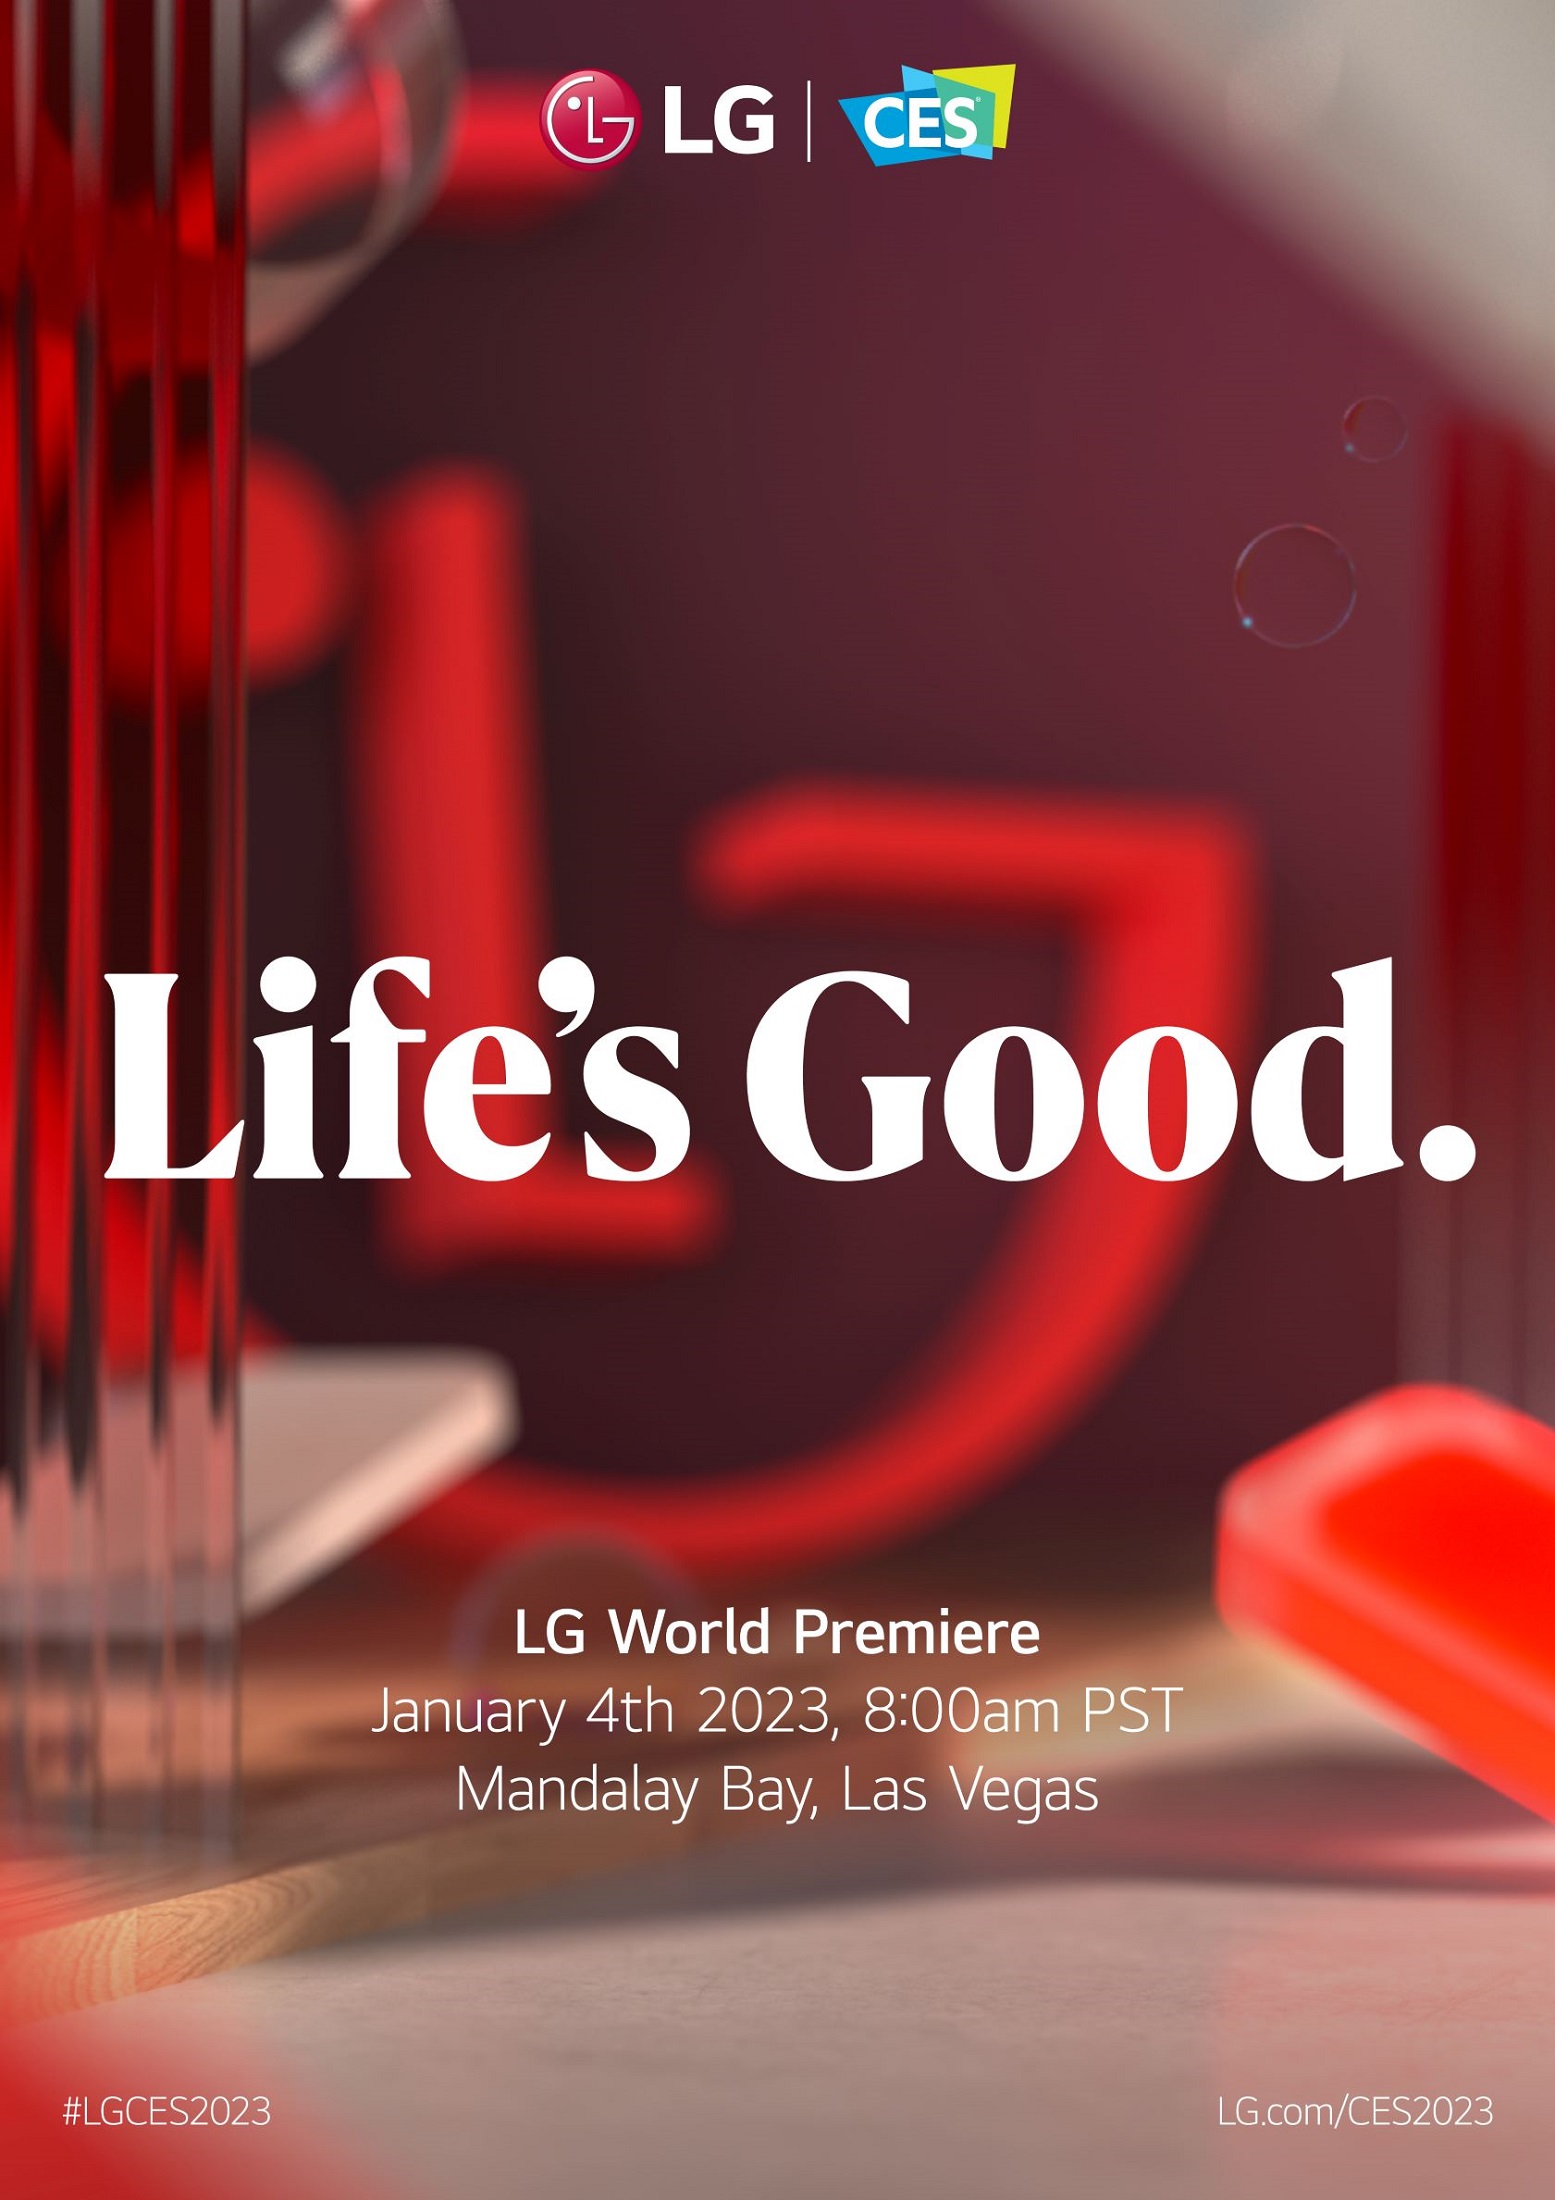 The promotional image of LG for CES 2023_Portrait